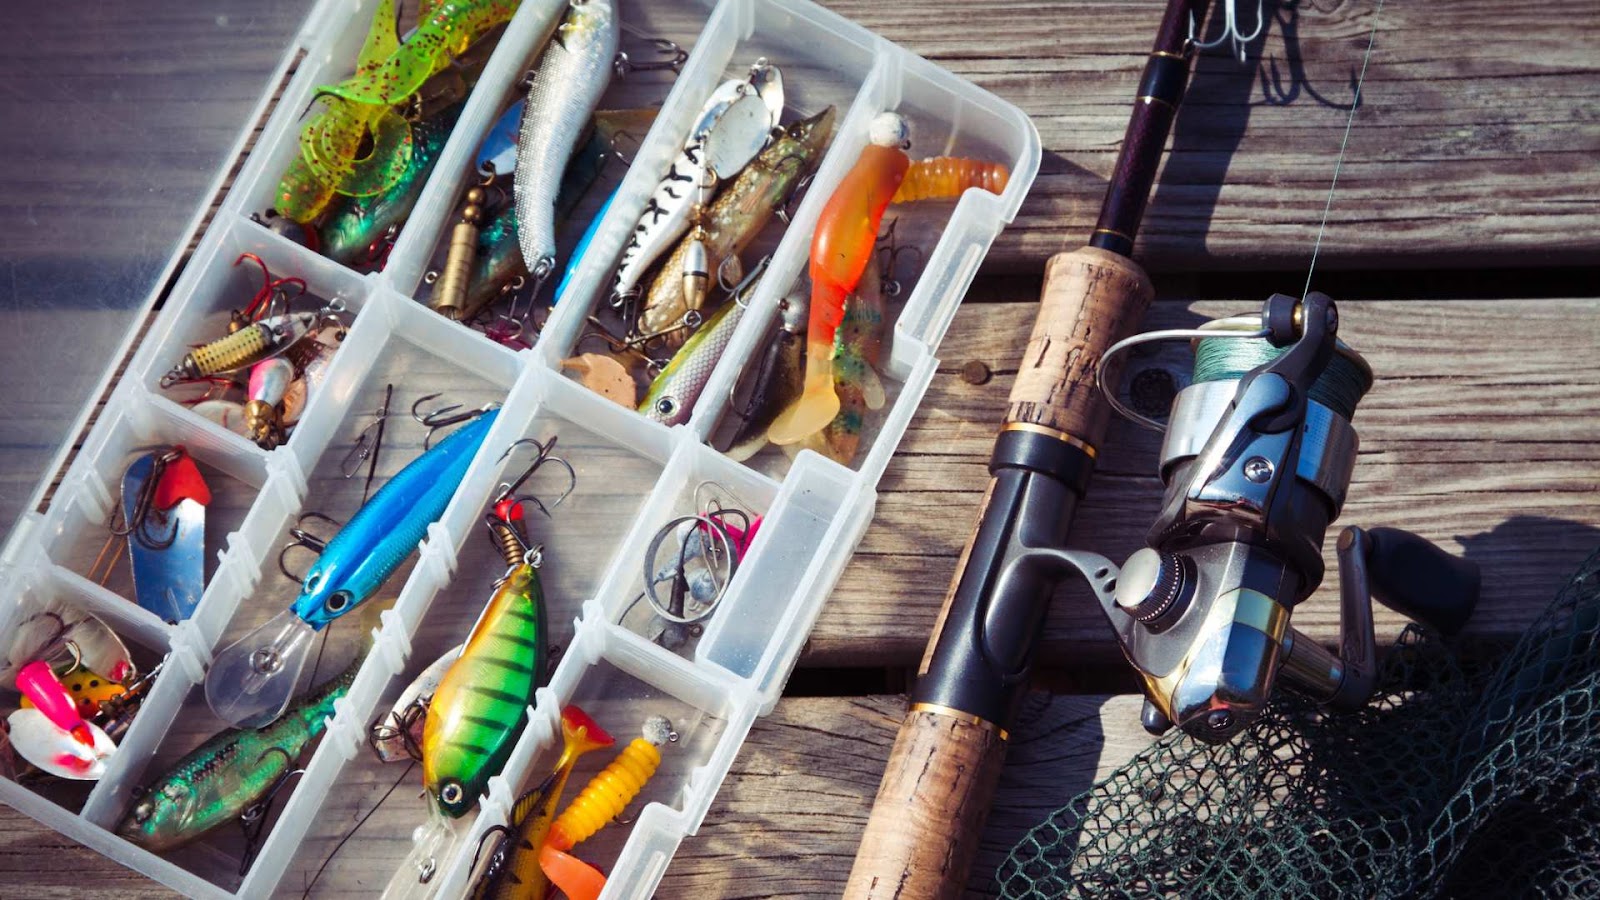 Upgrading your walleye fish gear